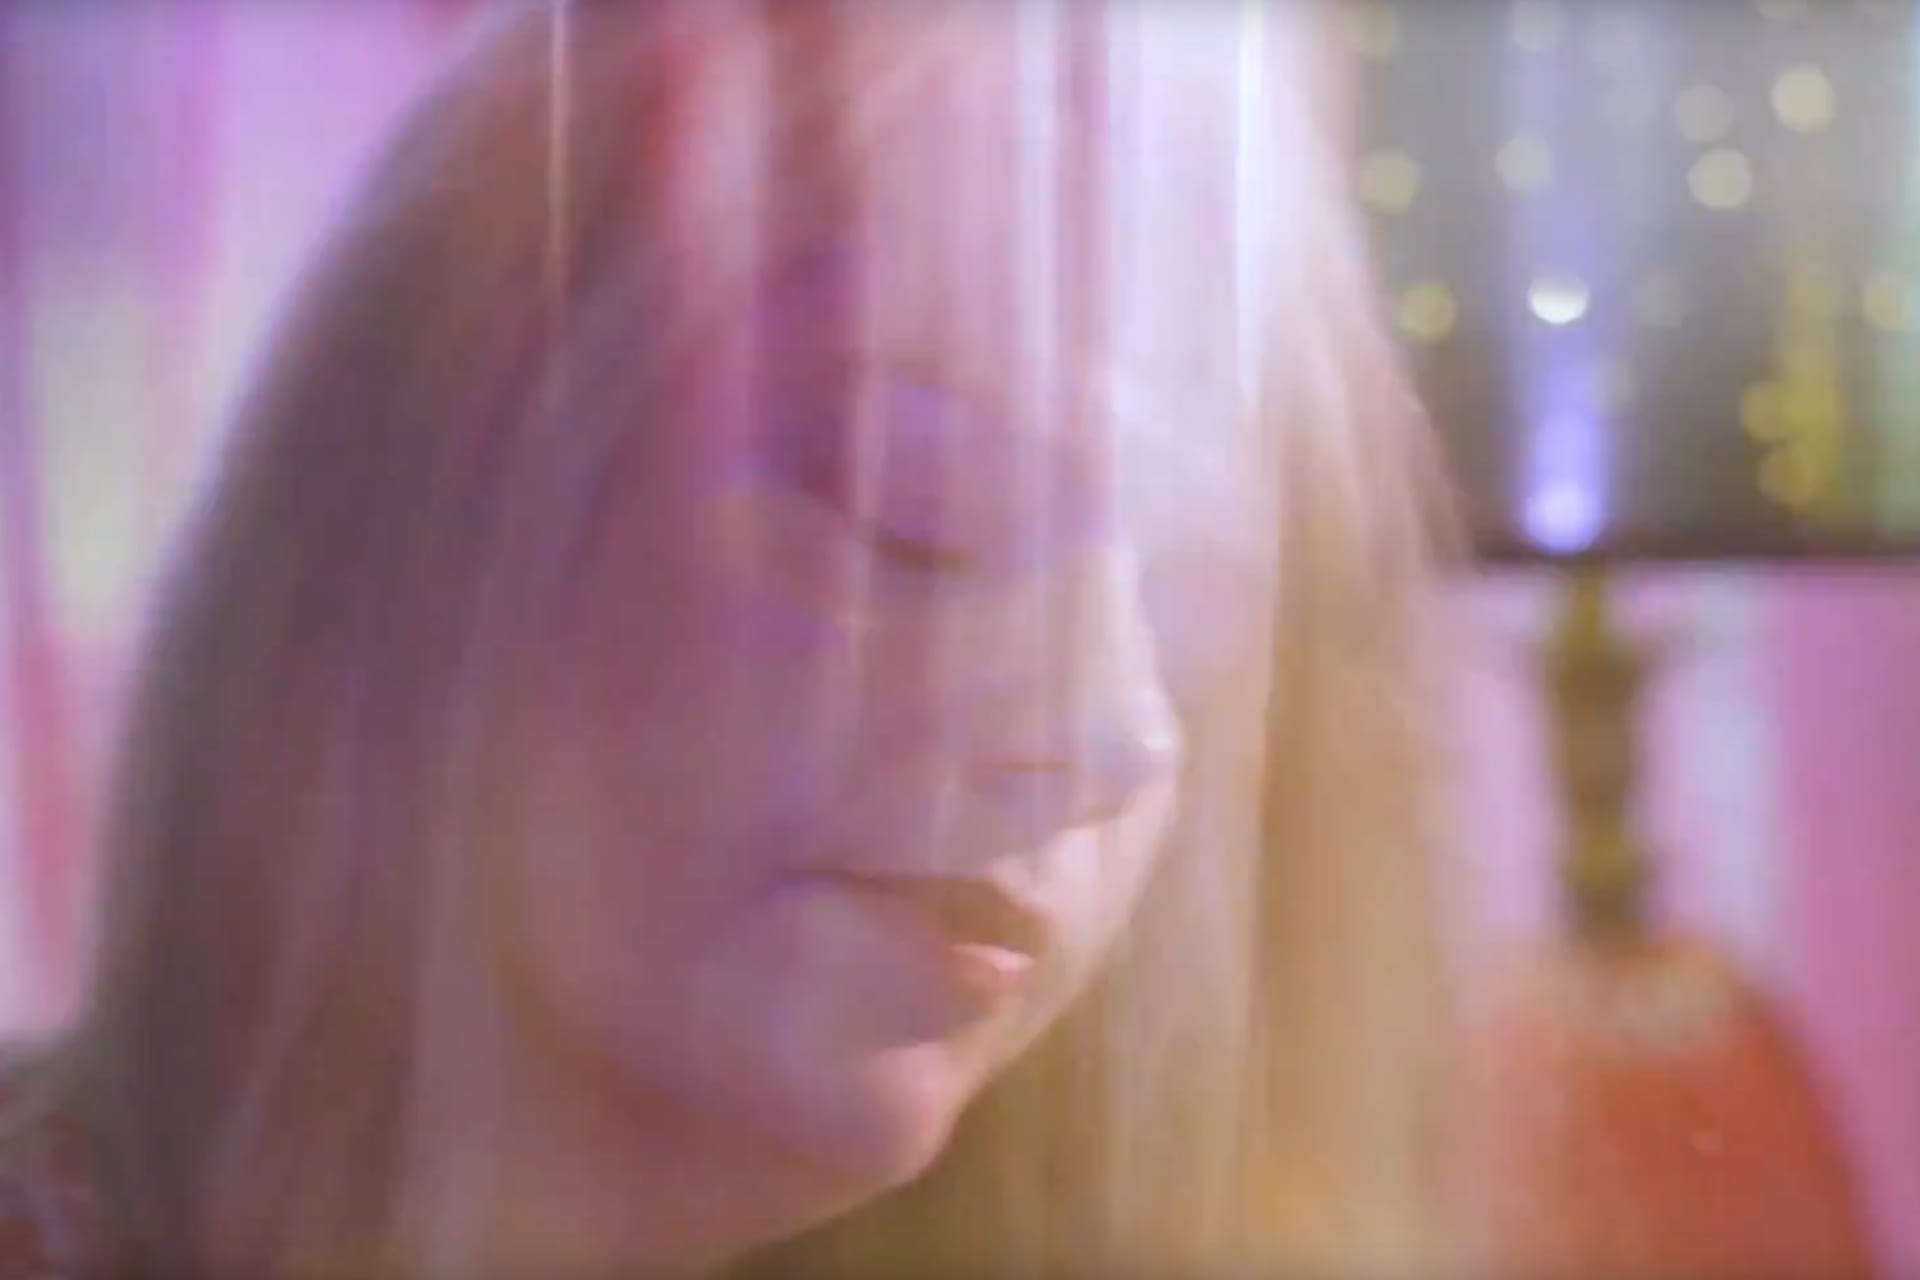 Rebecca in a still frame from Black Coral video, with color overlays over her face